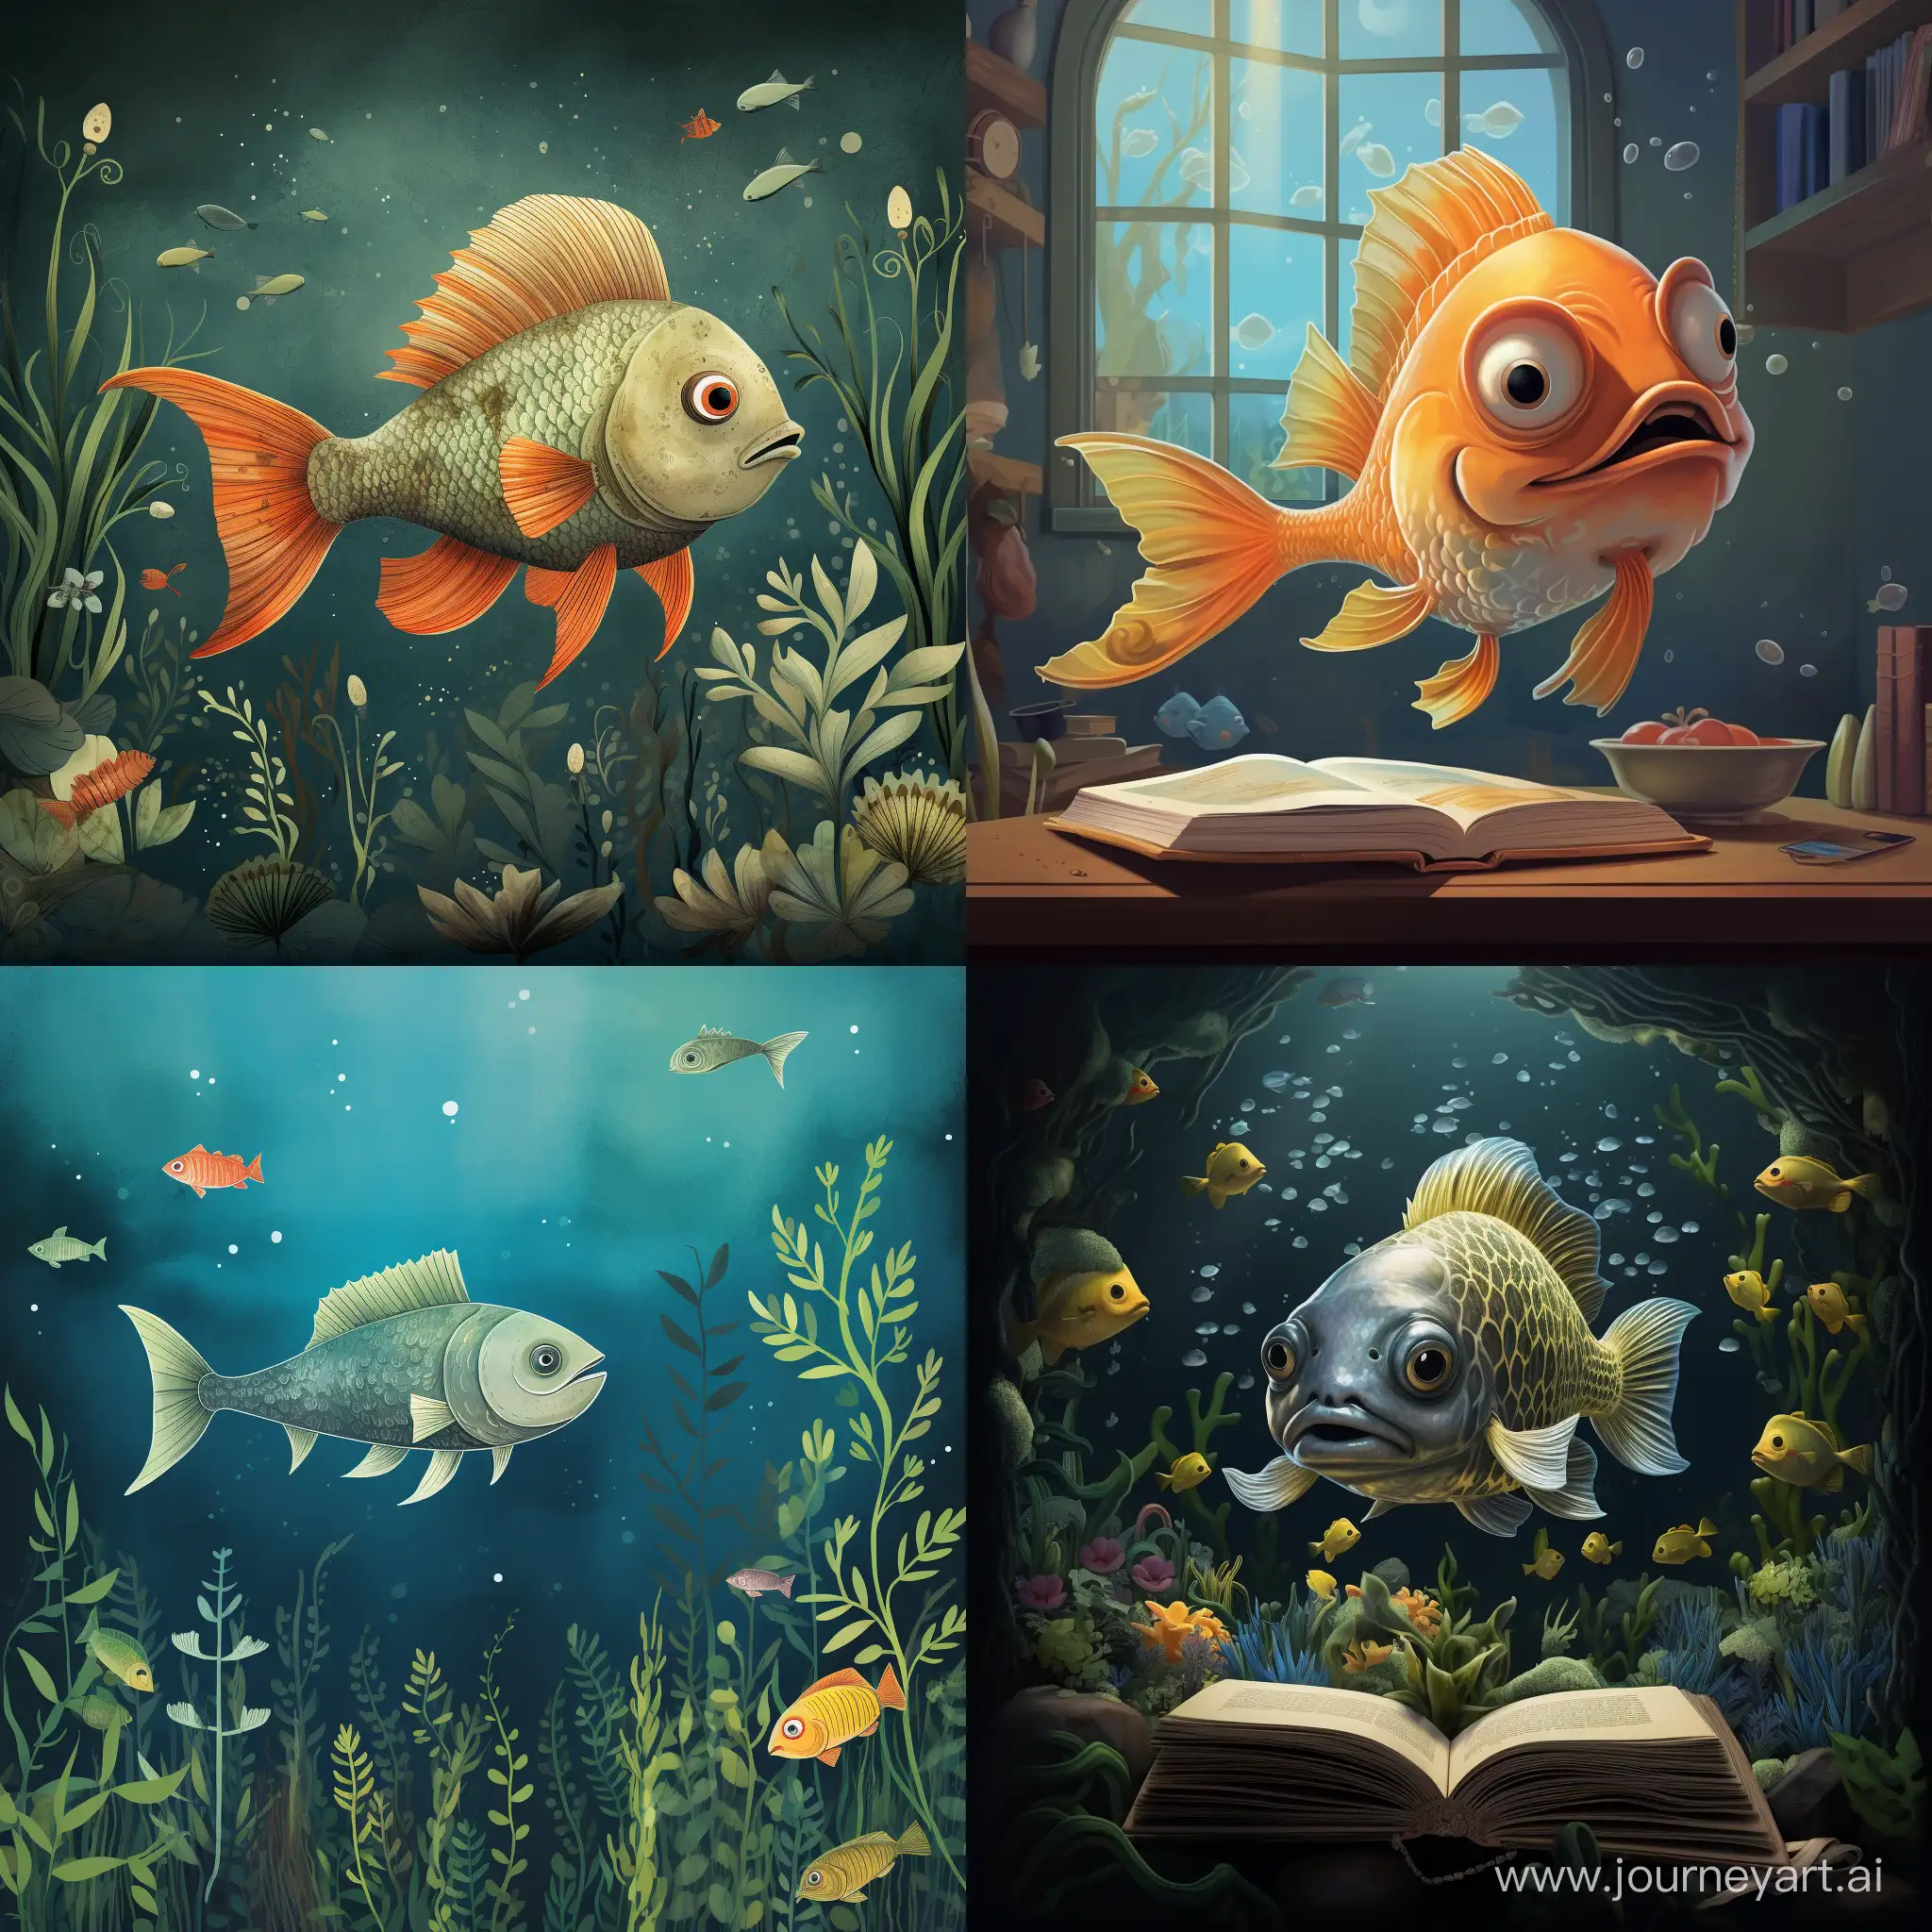   children book from a fish
